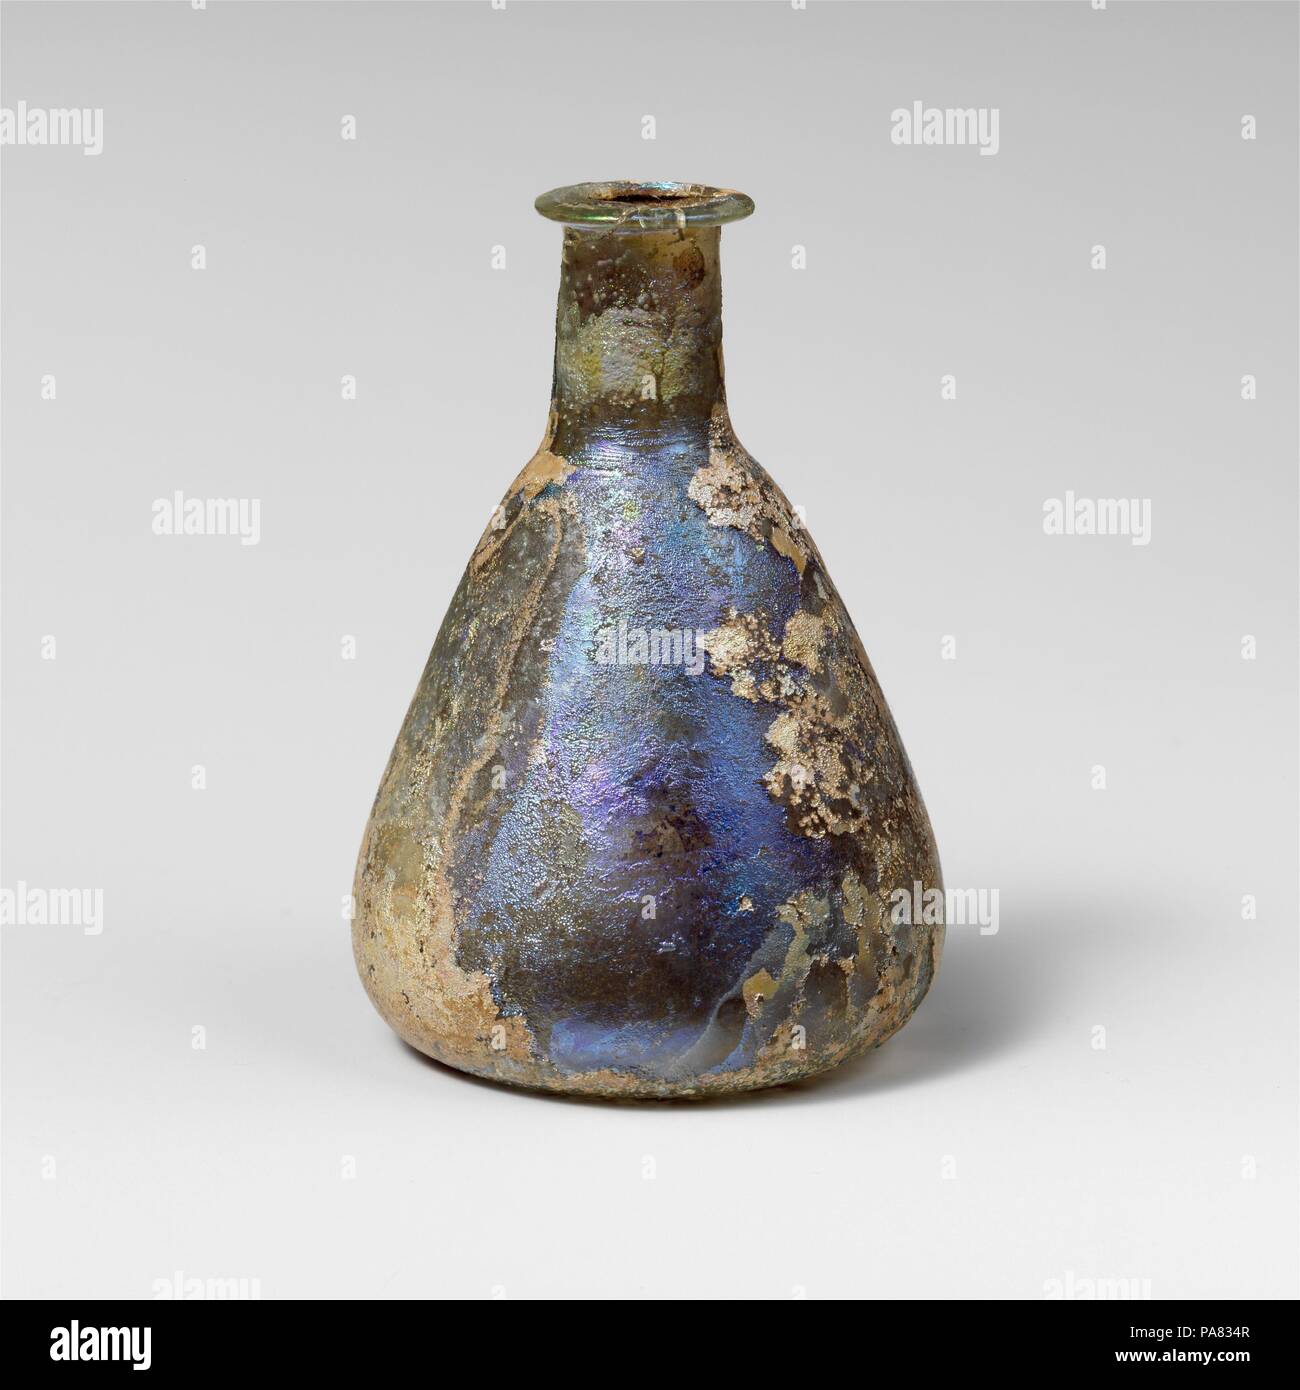 Glass perfume bottle. Culture: Roman. Dimensions: Overall: 3 3/16in. (8.1cm)  Diam.: 2 3/16 x 13/16 in. (5.6 x 2.1 cm). Date: 1st century A.D..  Colorless with pale blue green tinge.  Rim folded out, over, and in, flattened on top; short, cylindrical neck, with tooling marks around base; conical body, rounded at base; concave bottom.  Complete, but broken and repaired on one side of rim; many pinprick bubbles; deep pitting, dulling, and iridescent weathering.  Contains large black (burnt ?) solid object. Museum: Metropolitan Museum of Art, New York, USA. Stock Photo